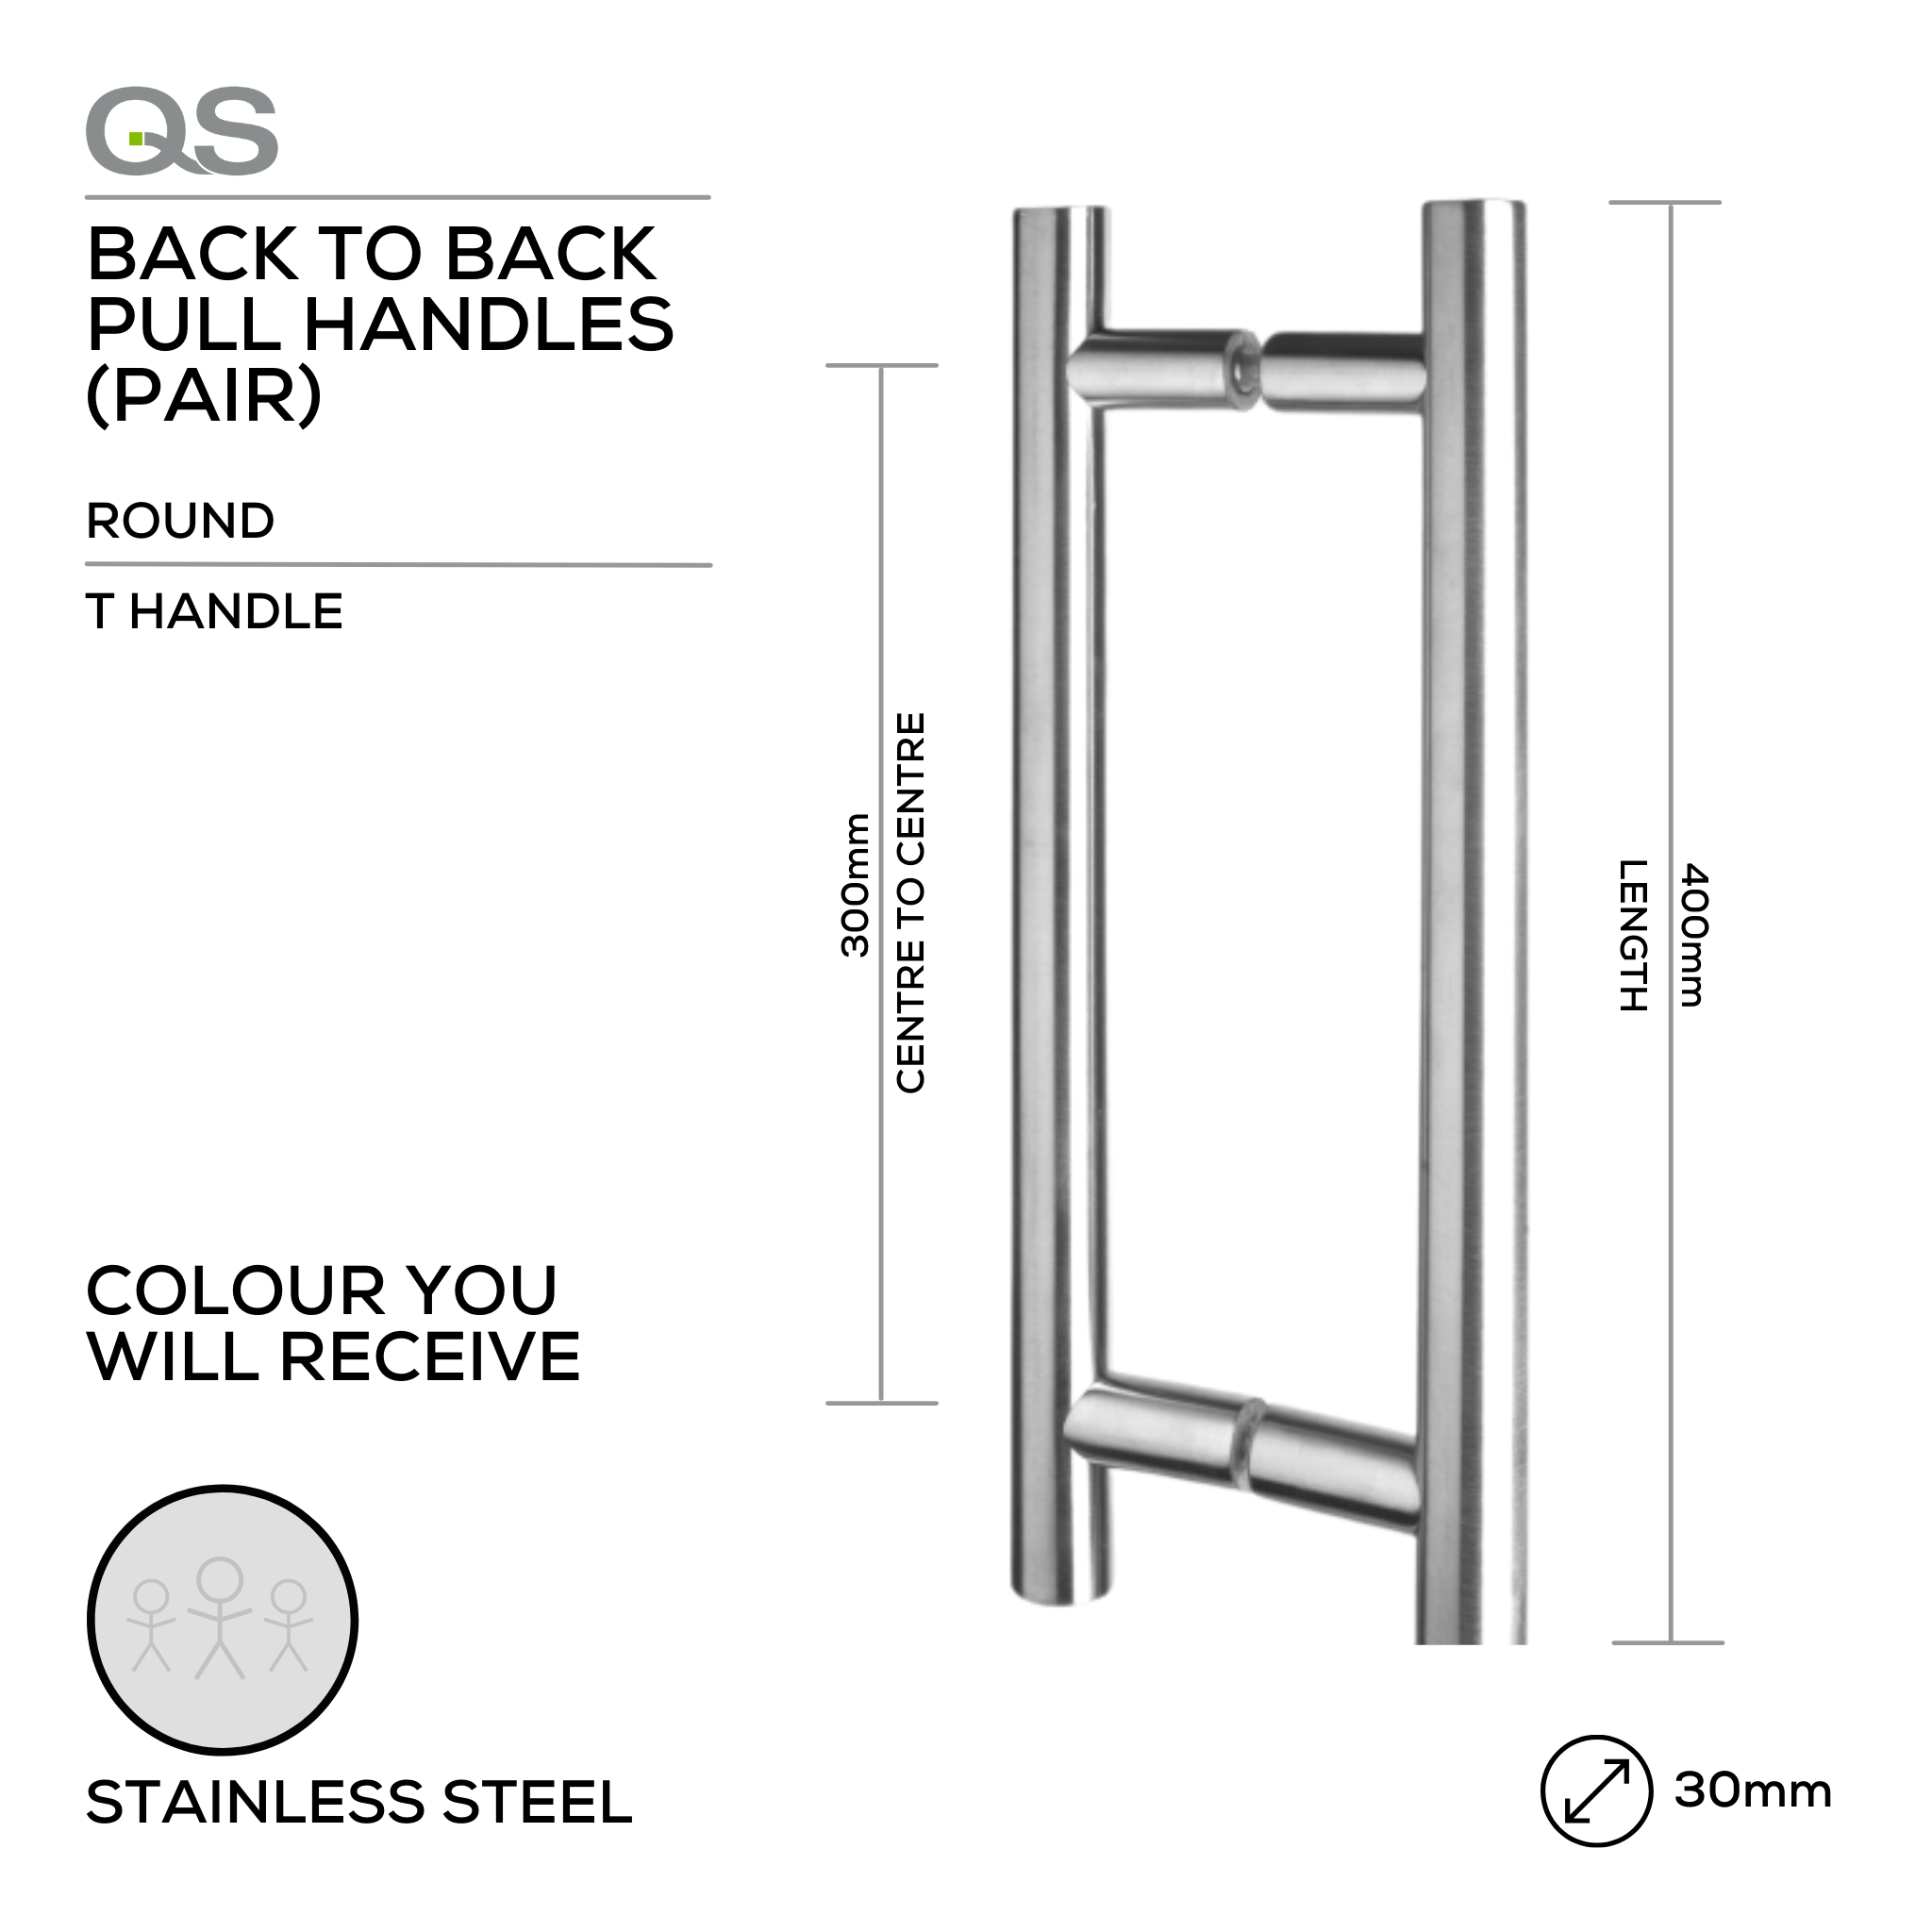 QS2507 T Handle, Pull Handle, Round, T Handle, BTB, 30mm (Ø) x 400mm (l) x 300mm (ctc), Stainless Steel, QS